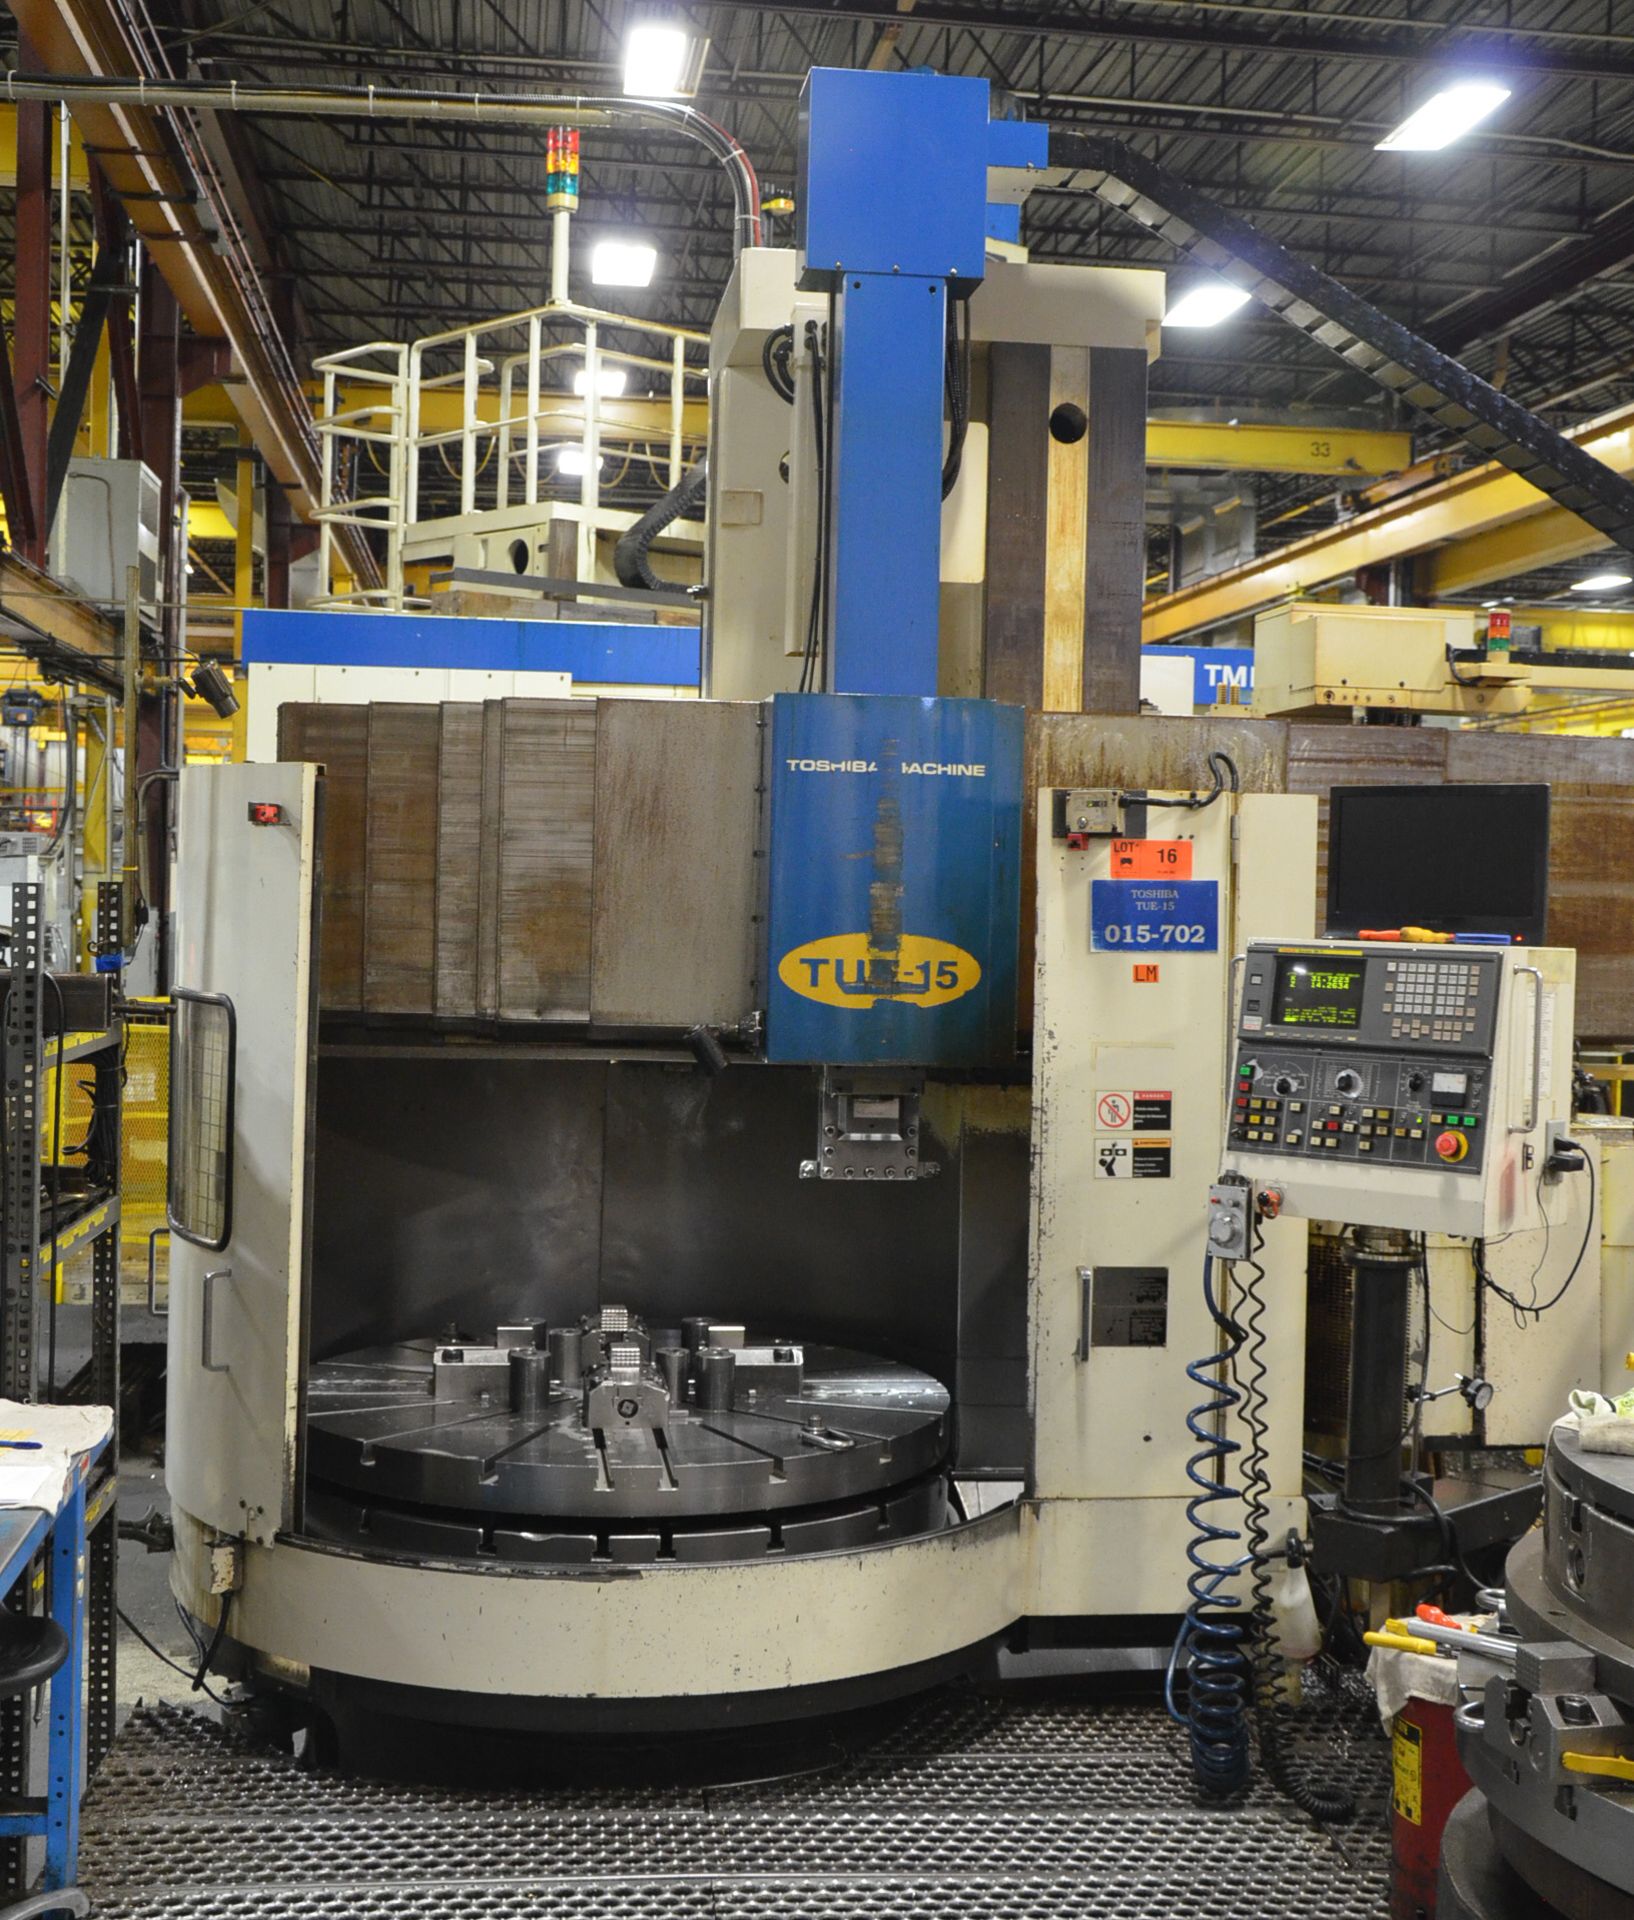 TOSHIBA SHIBAURA (08-2006) TUE-15 CNC VERTICAL BORING AND LIVE MILLING CENTER WITH FANUC SERIES 18-T